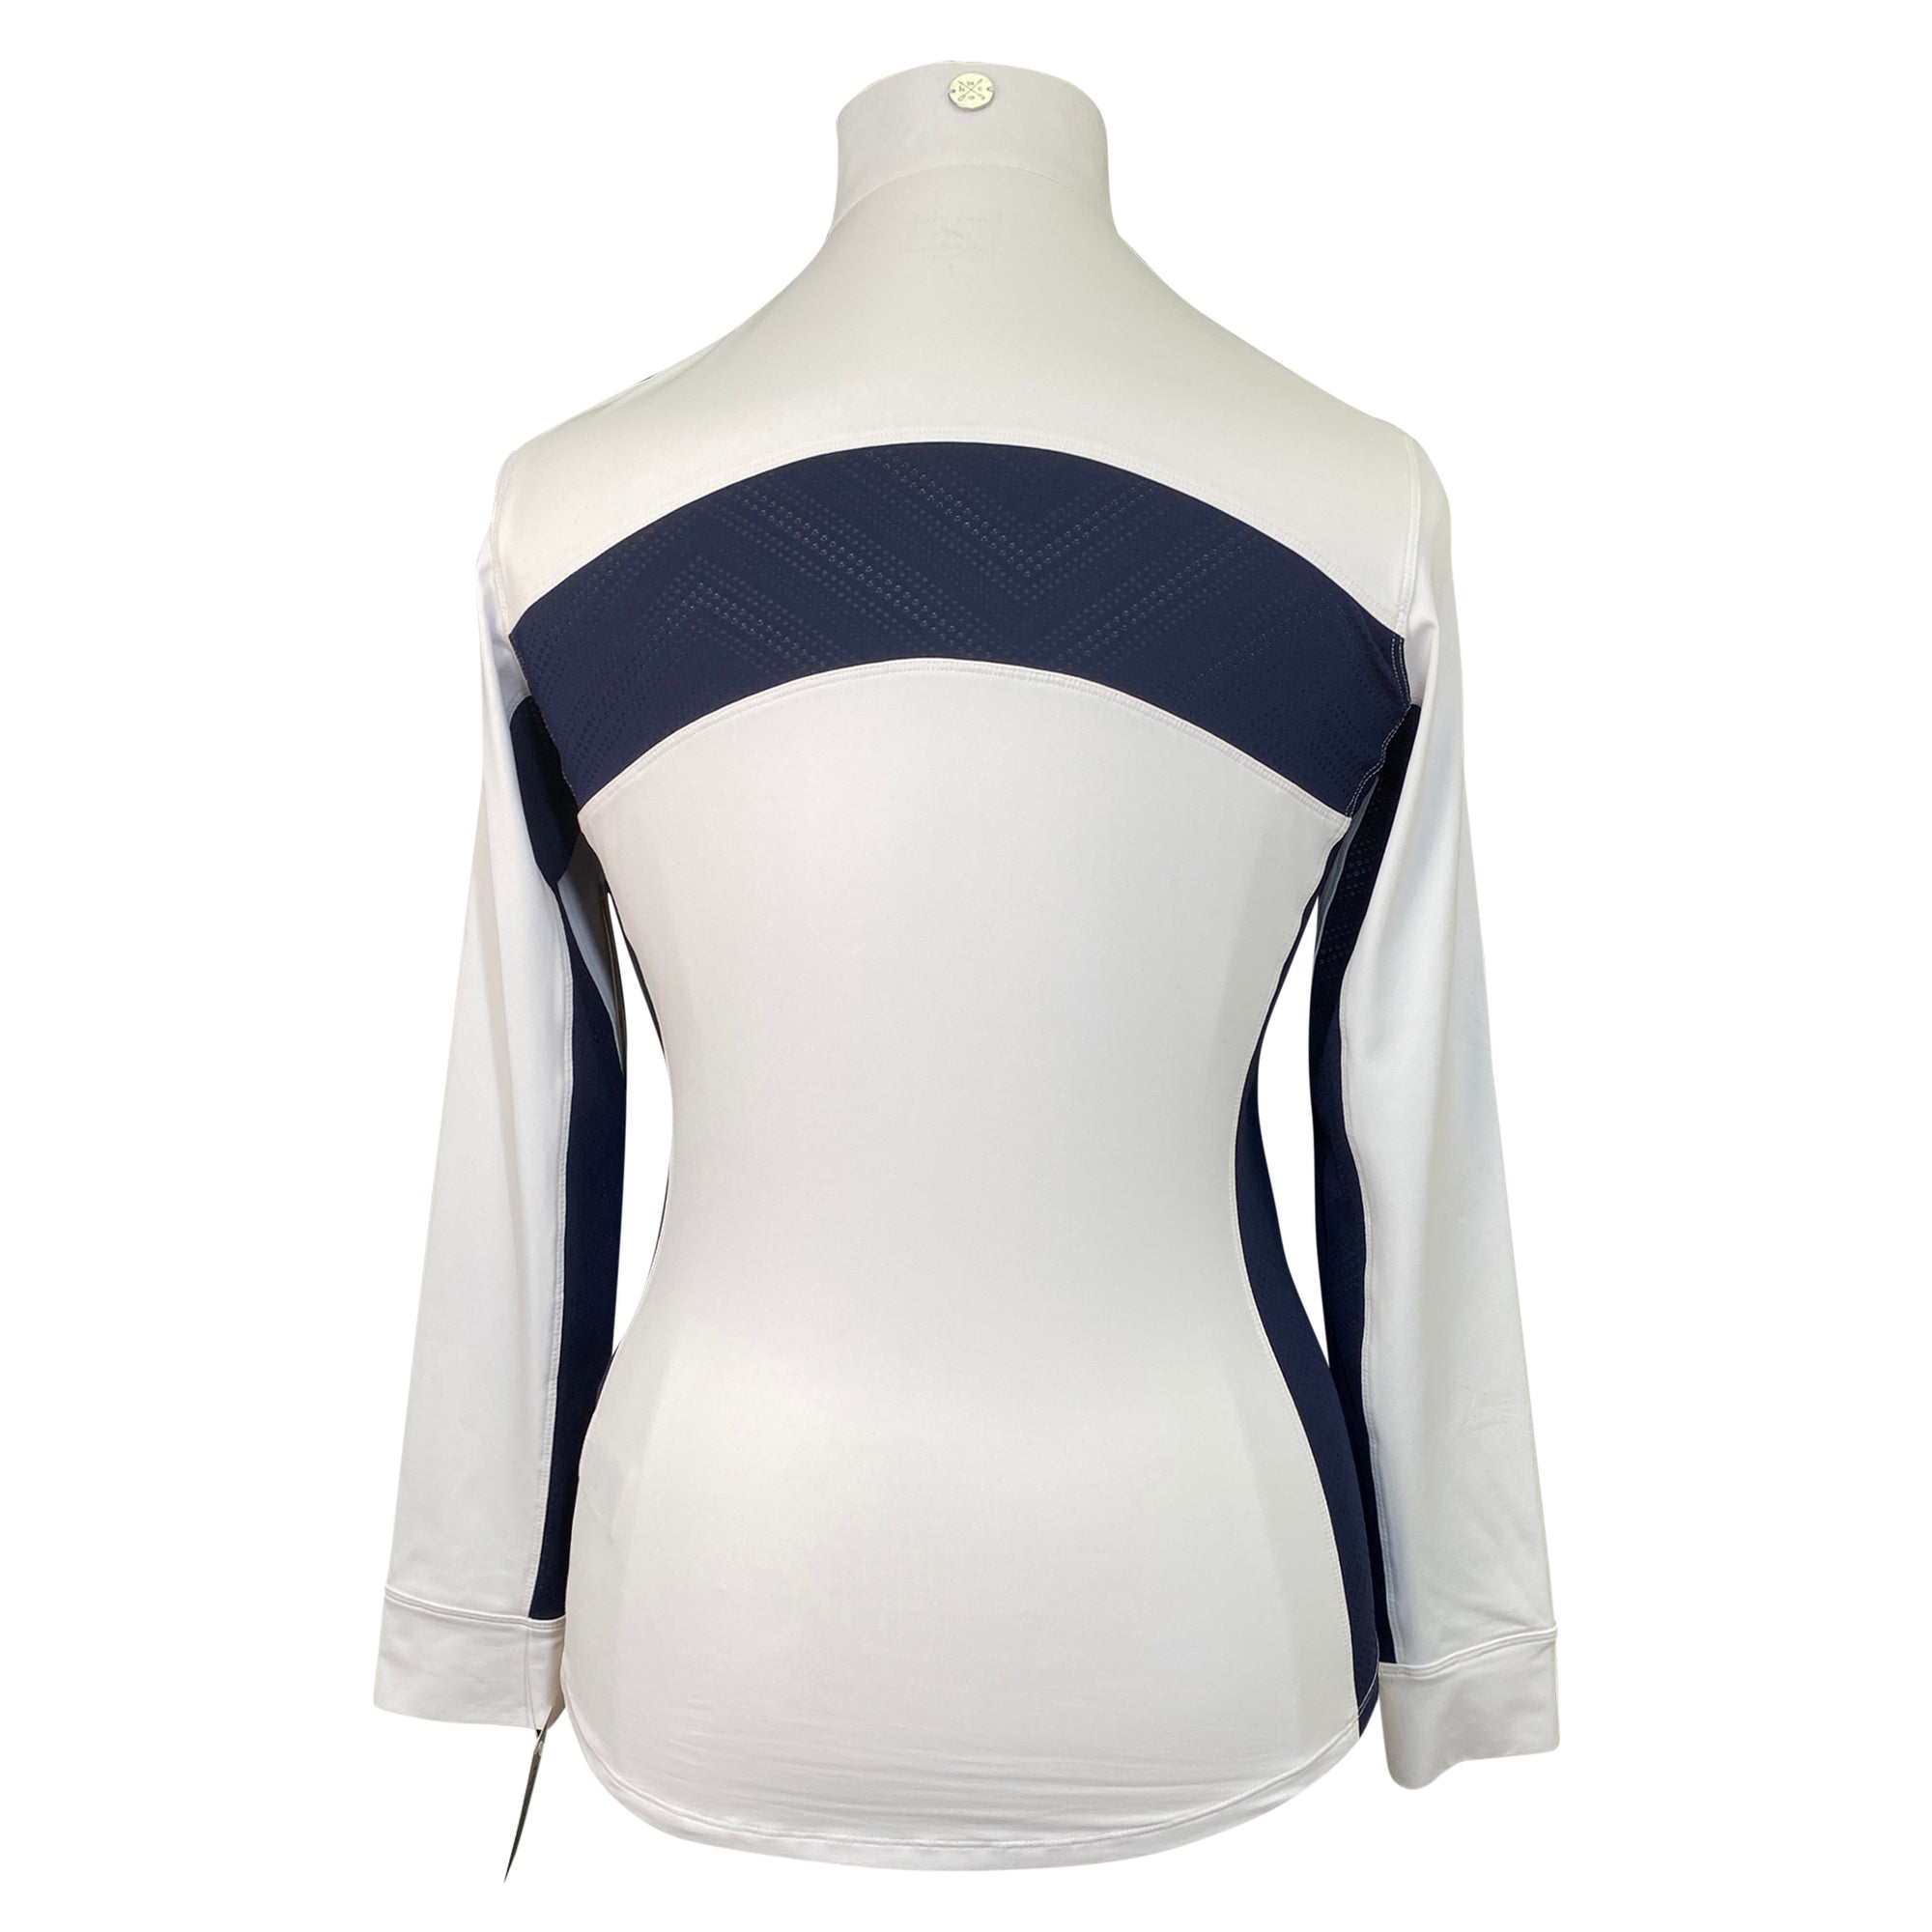 Hunt Club 'Sterling' Competition Shirt in White/Navy